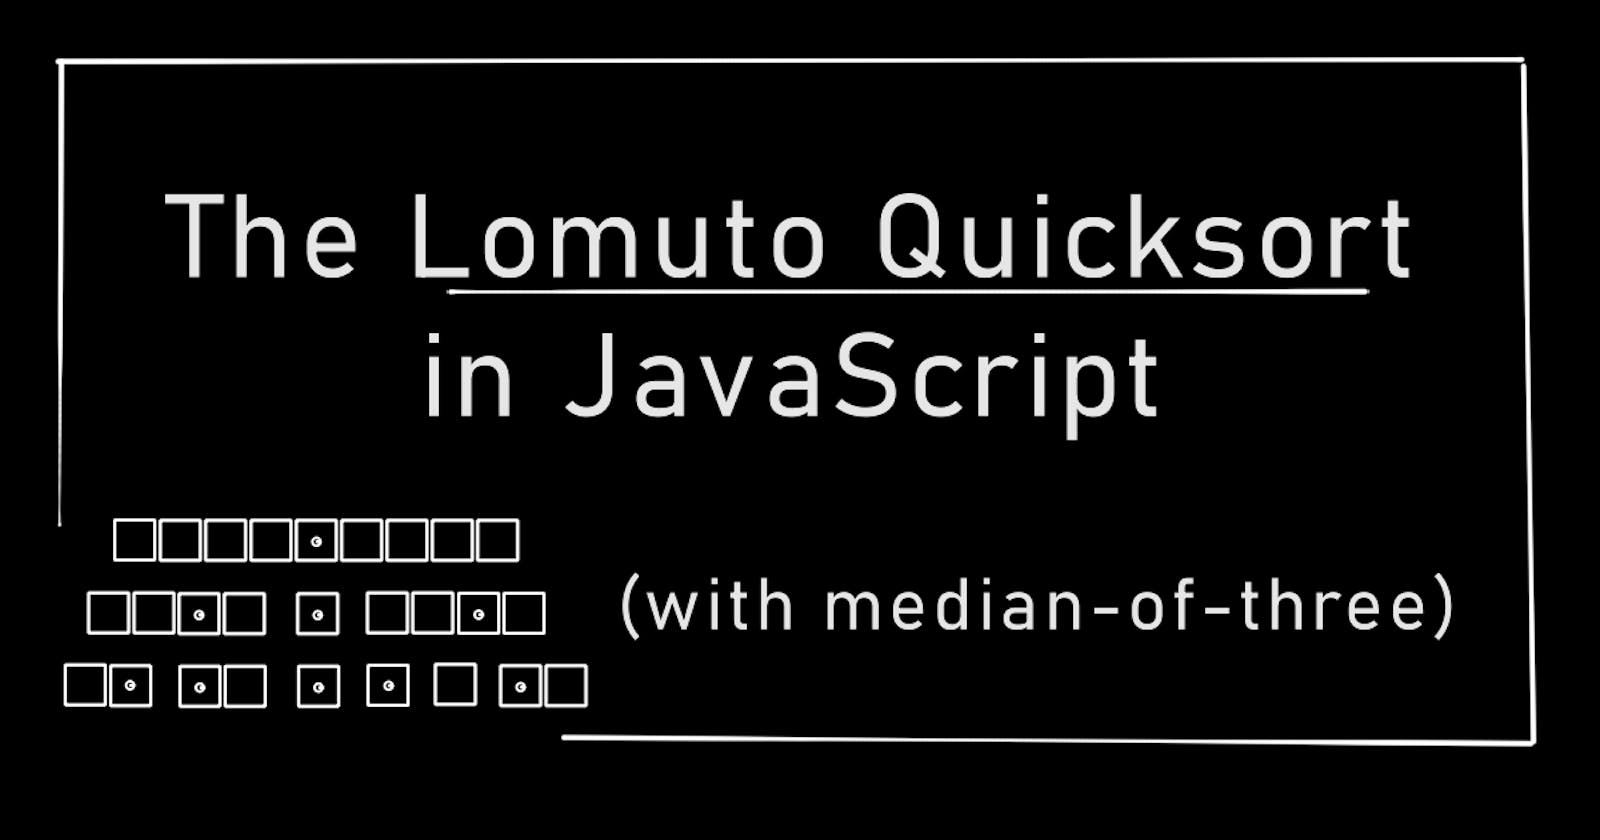 Implementing a Lomuto Quicksort algorithm in JavaScript with median-of-three pivot selection